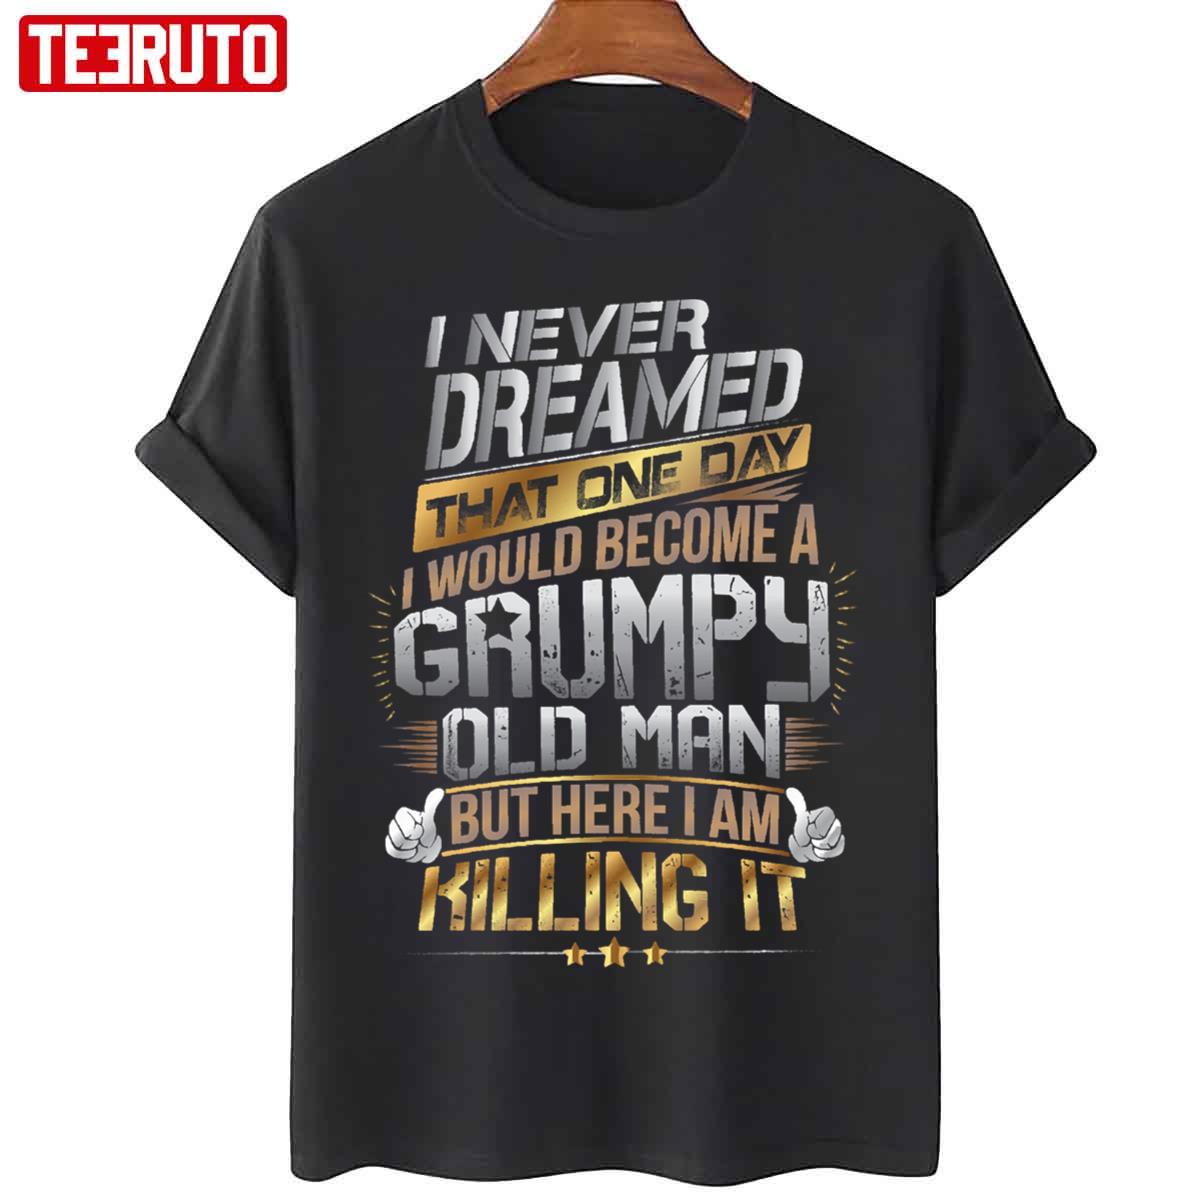 I Never Dreamed That One Day I'd Become A Grumpy Old Man But Here I Am Killing It Unisex Sweatshirt